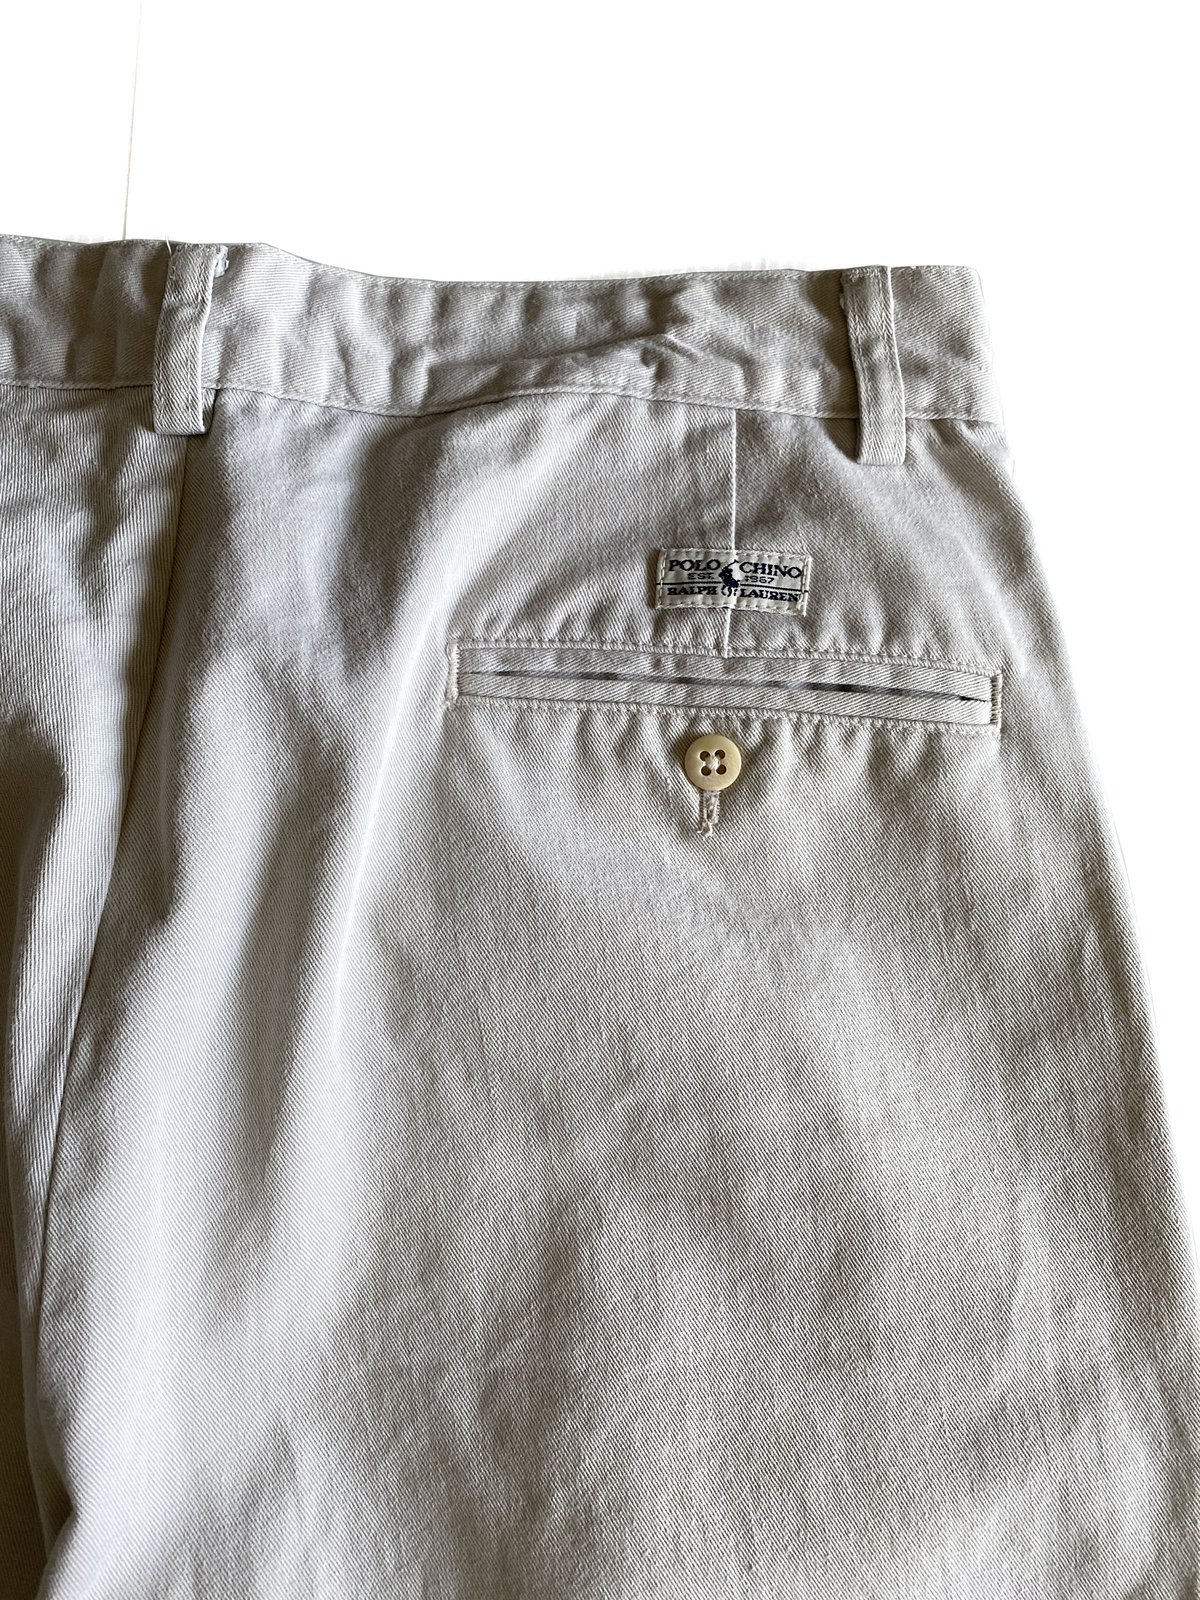 ANDREW Classic Chino by Polo by Ralph Lauren |